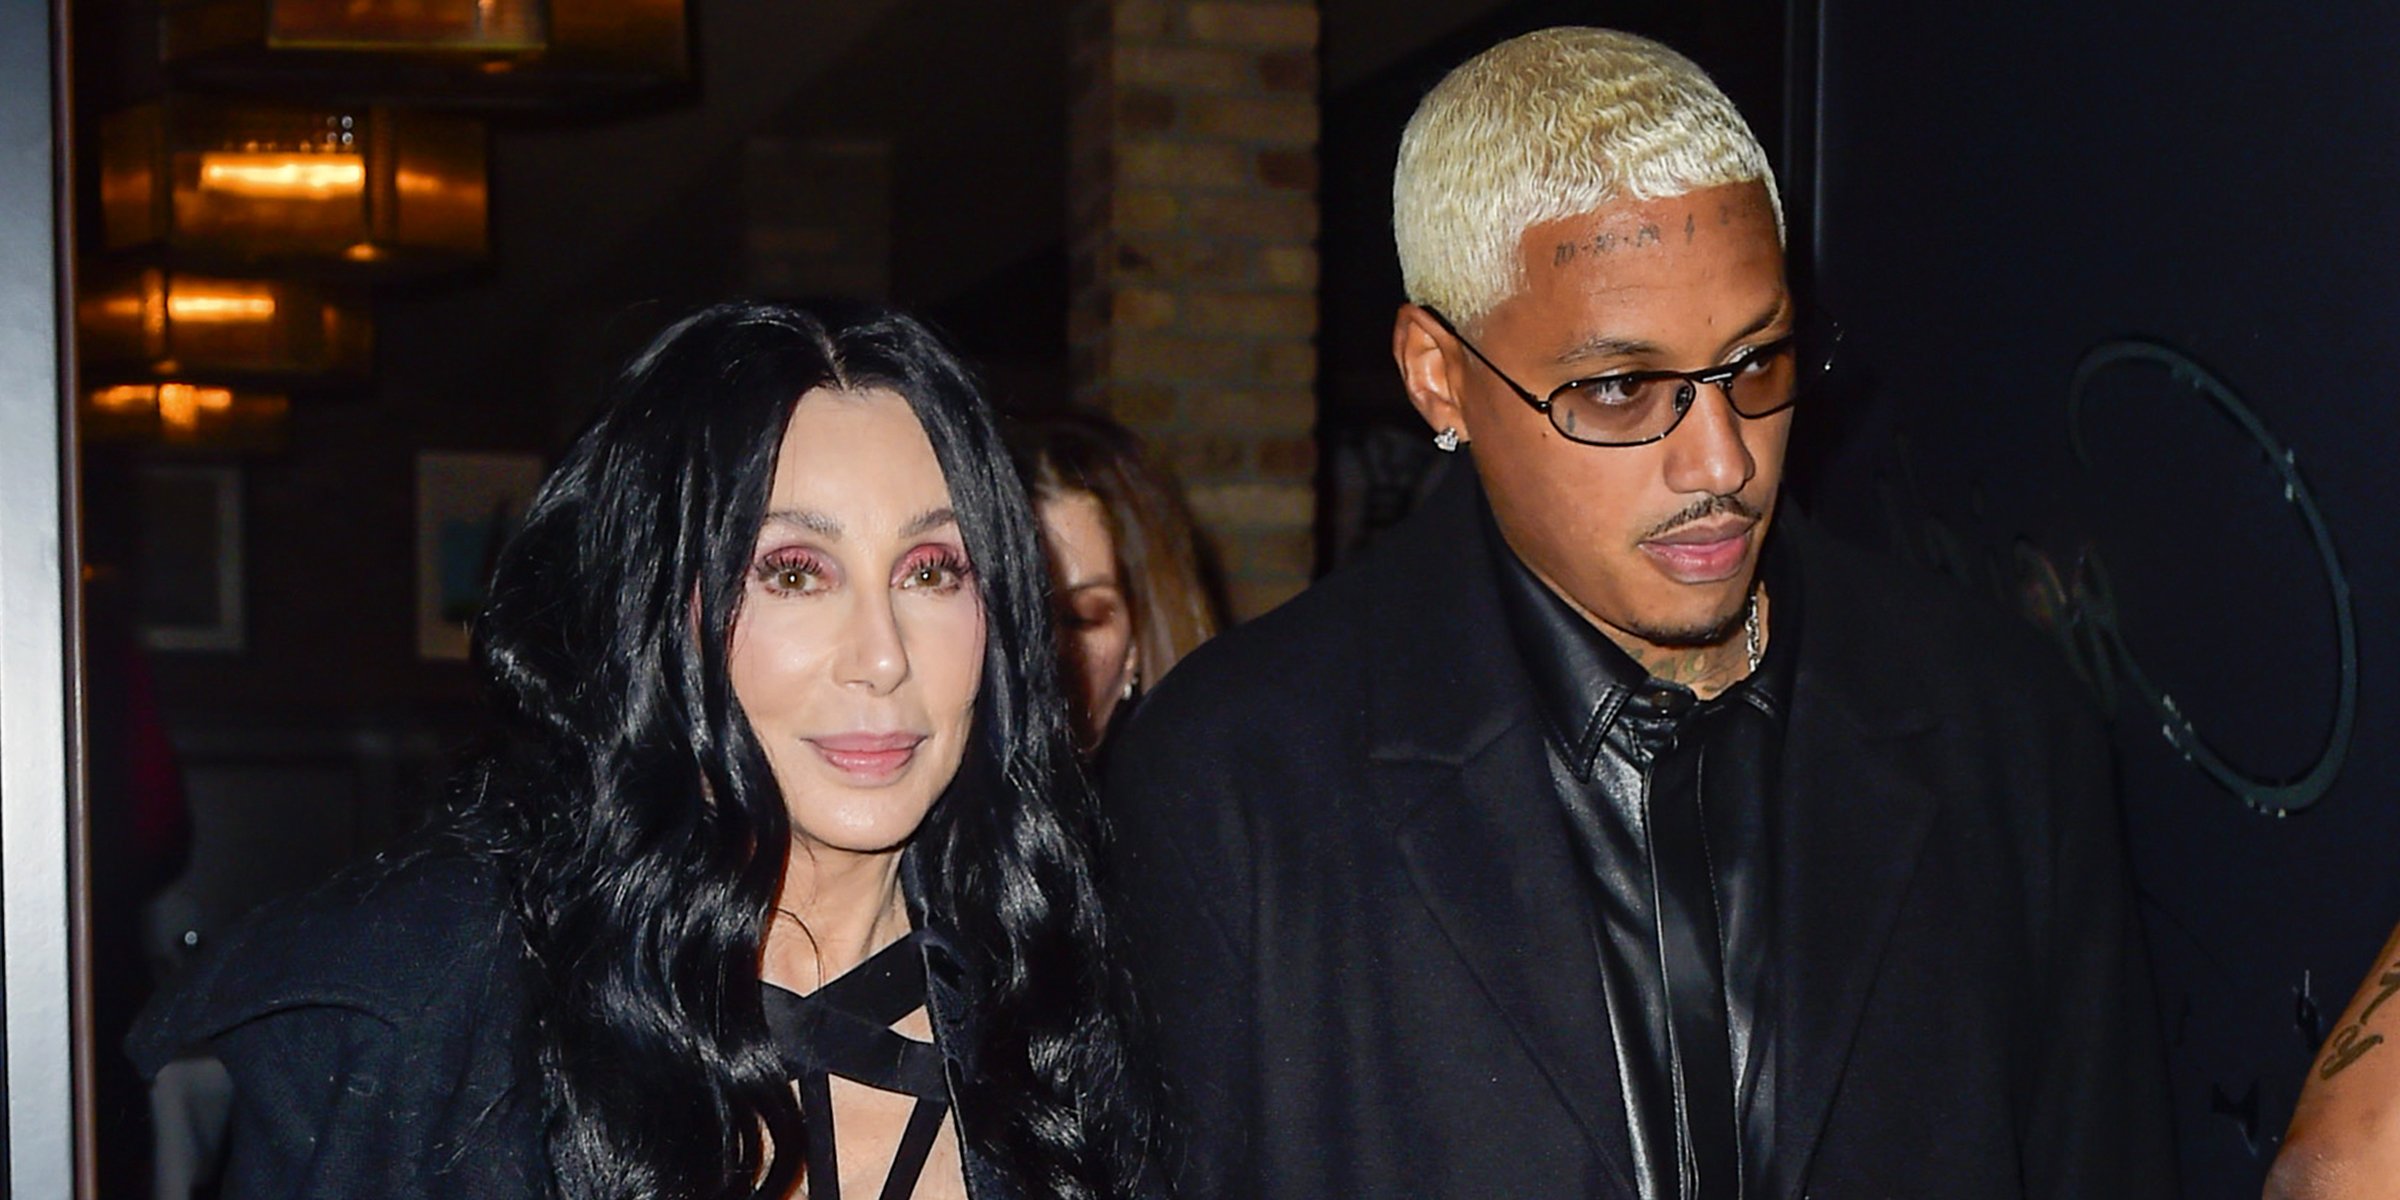 Cher and Alexander "AE" Are Photographed Leaving a Restaurant in West Hollywood | Source: Getty Images